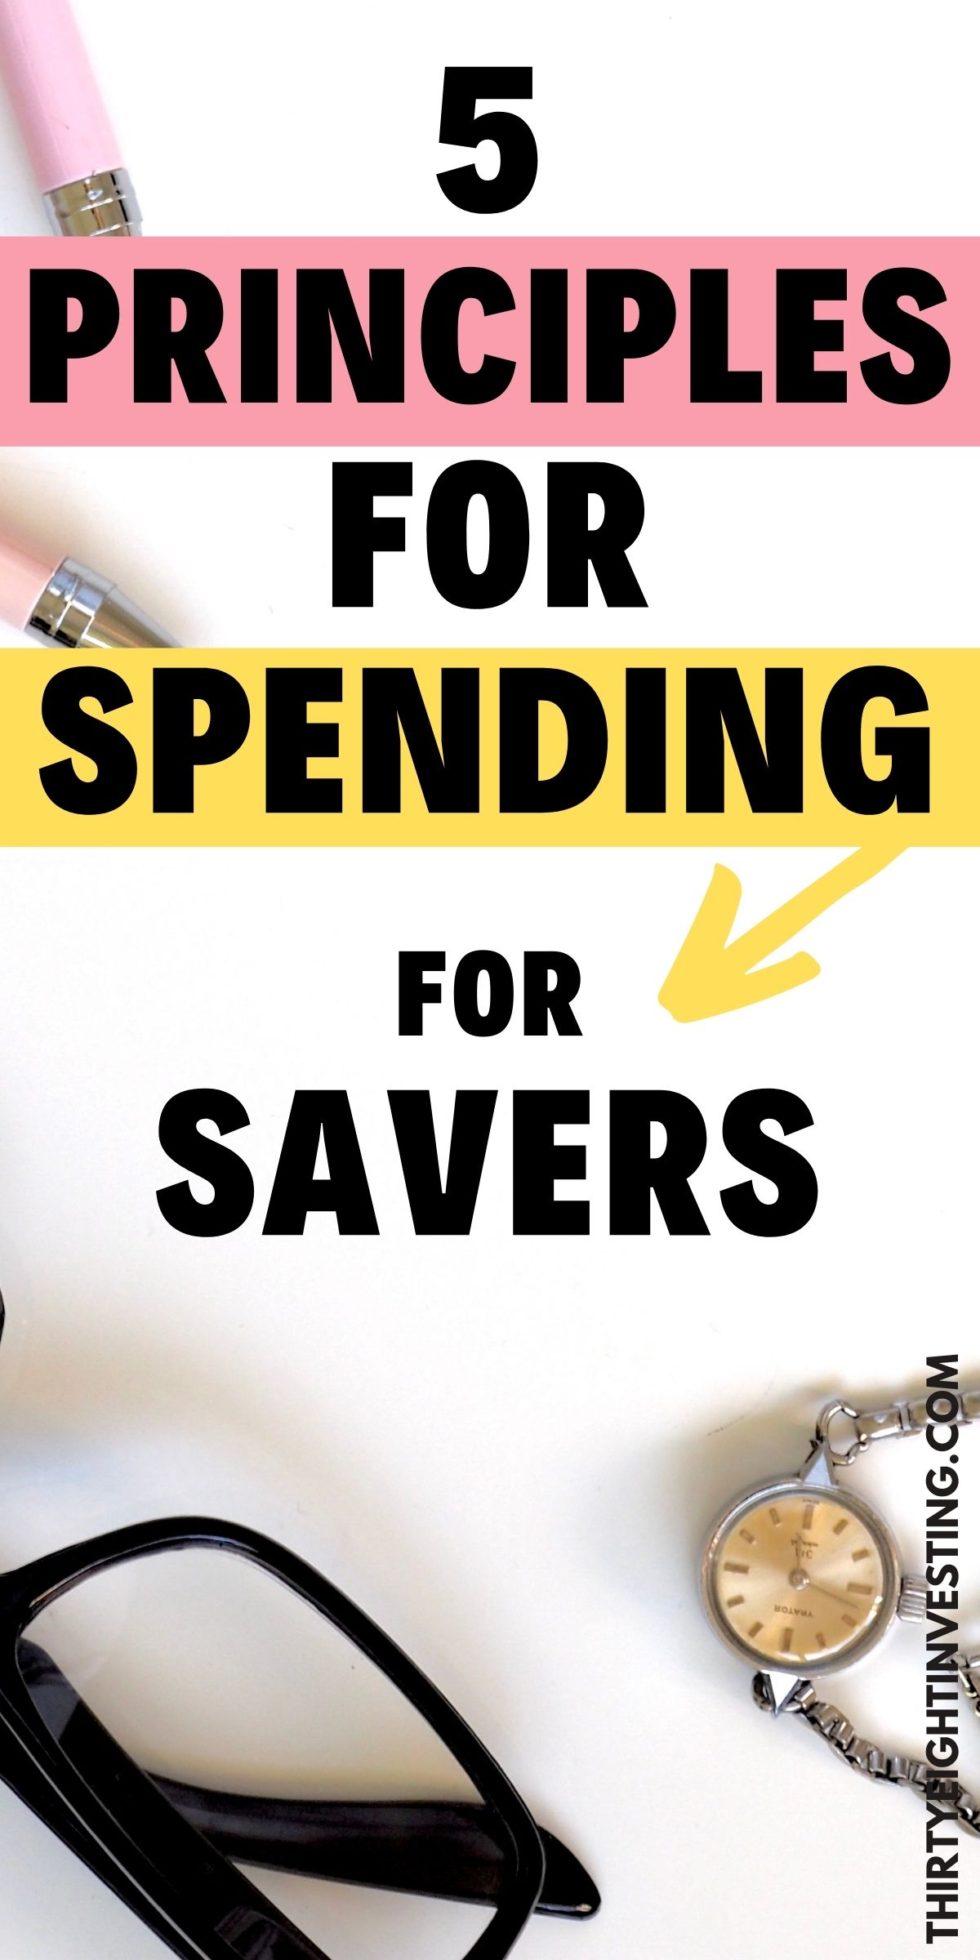 How to Spend Money on Yourself 5 Proven Principles for Happy Spending